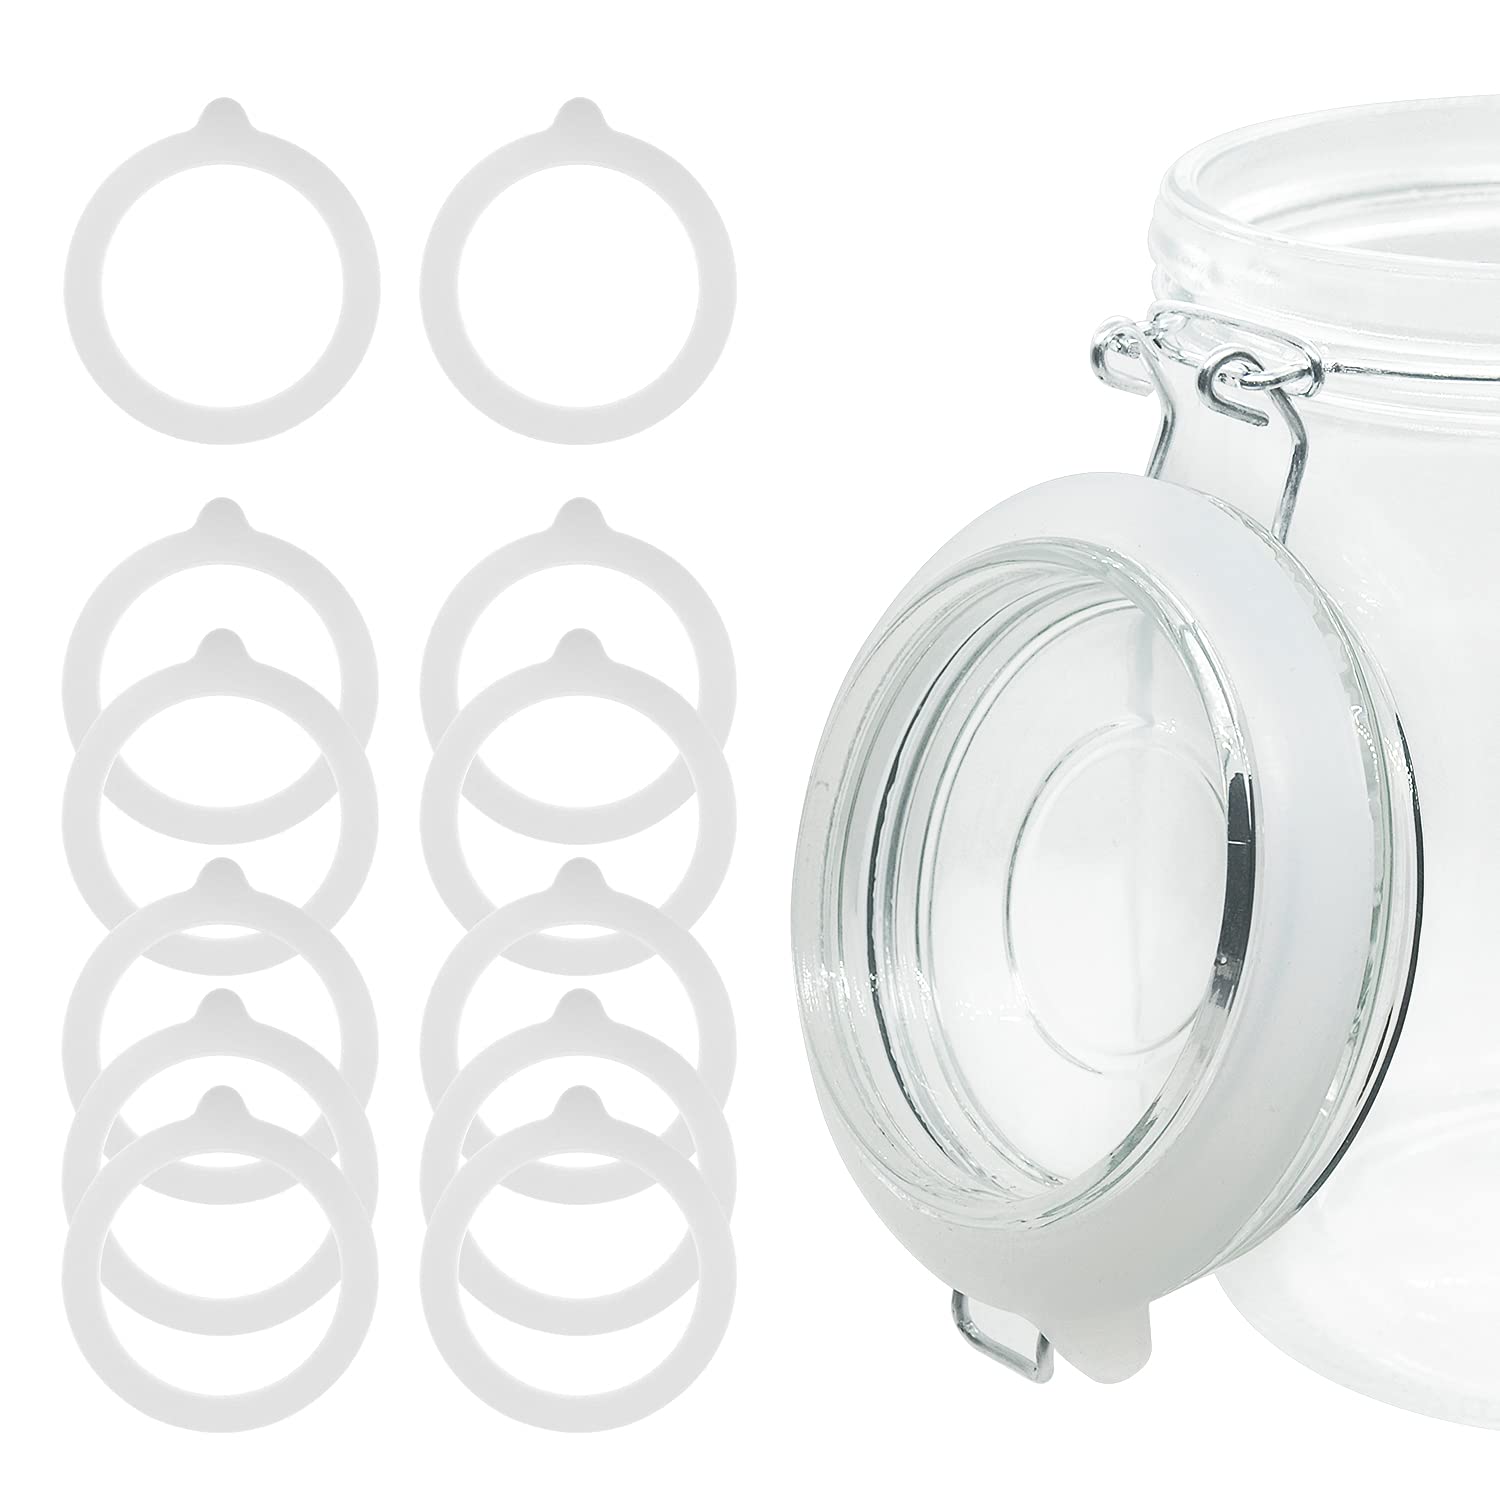 12 Pieces Rubber Seals Rings for Glass Jars, Airtight Silicone Replacement Gasket for Jars, Leakproof Silicone Gasket Sealing Rings for Mason Jars, Elastic and Fits Most Sizes (White)